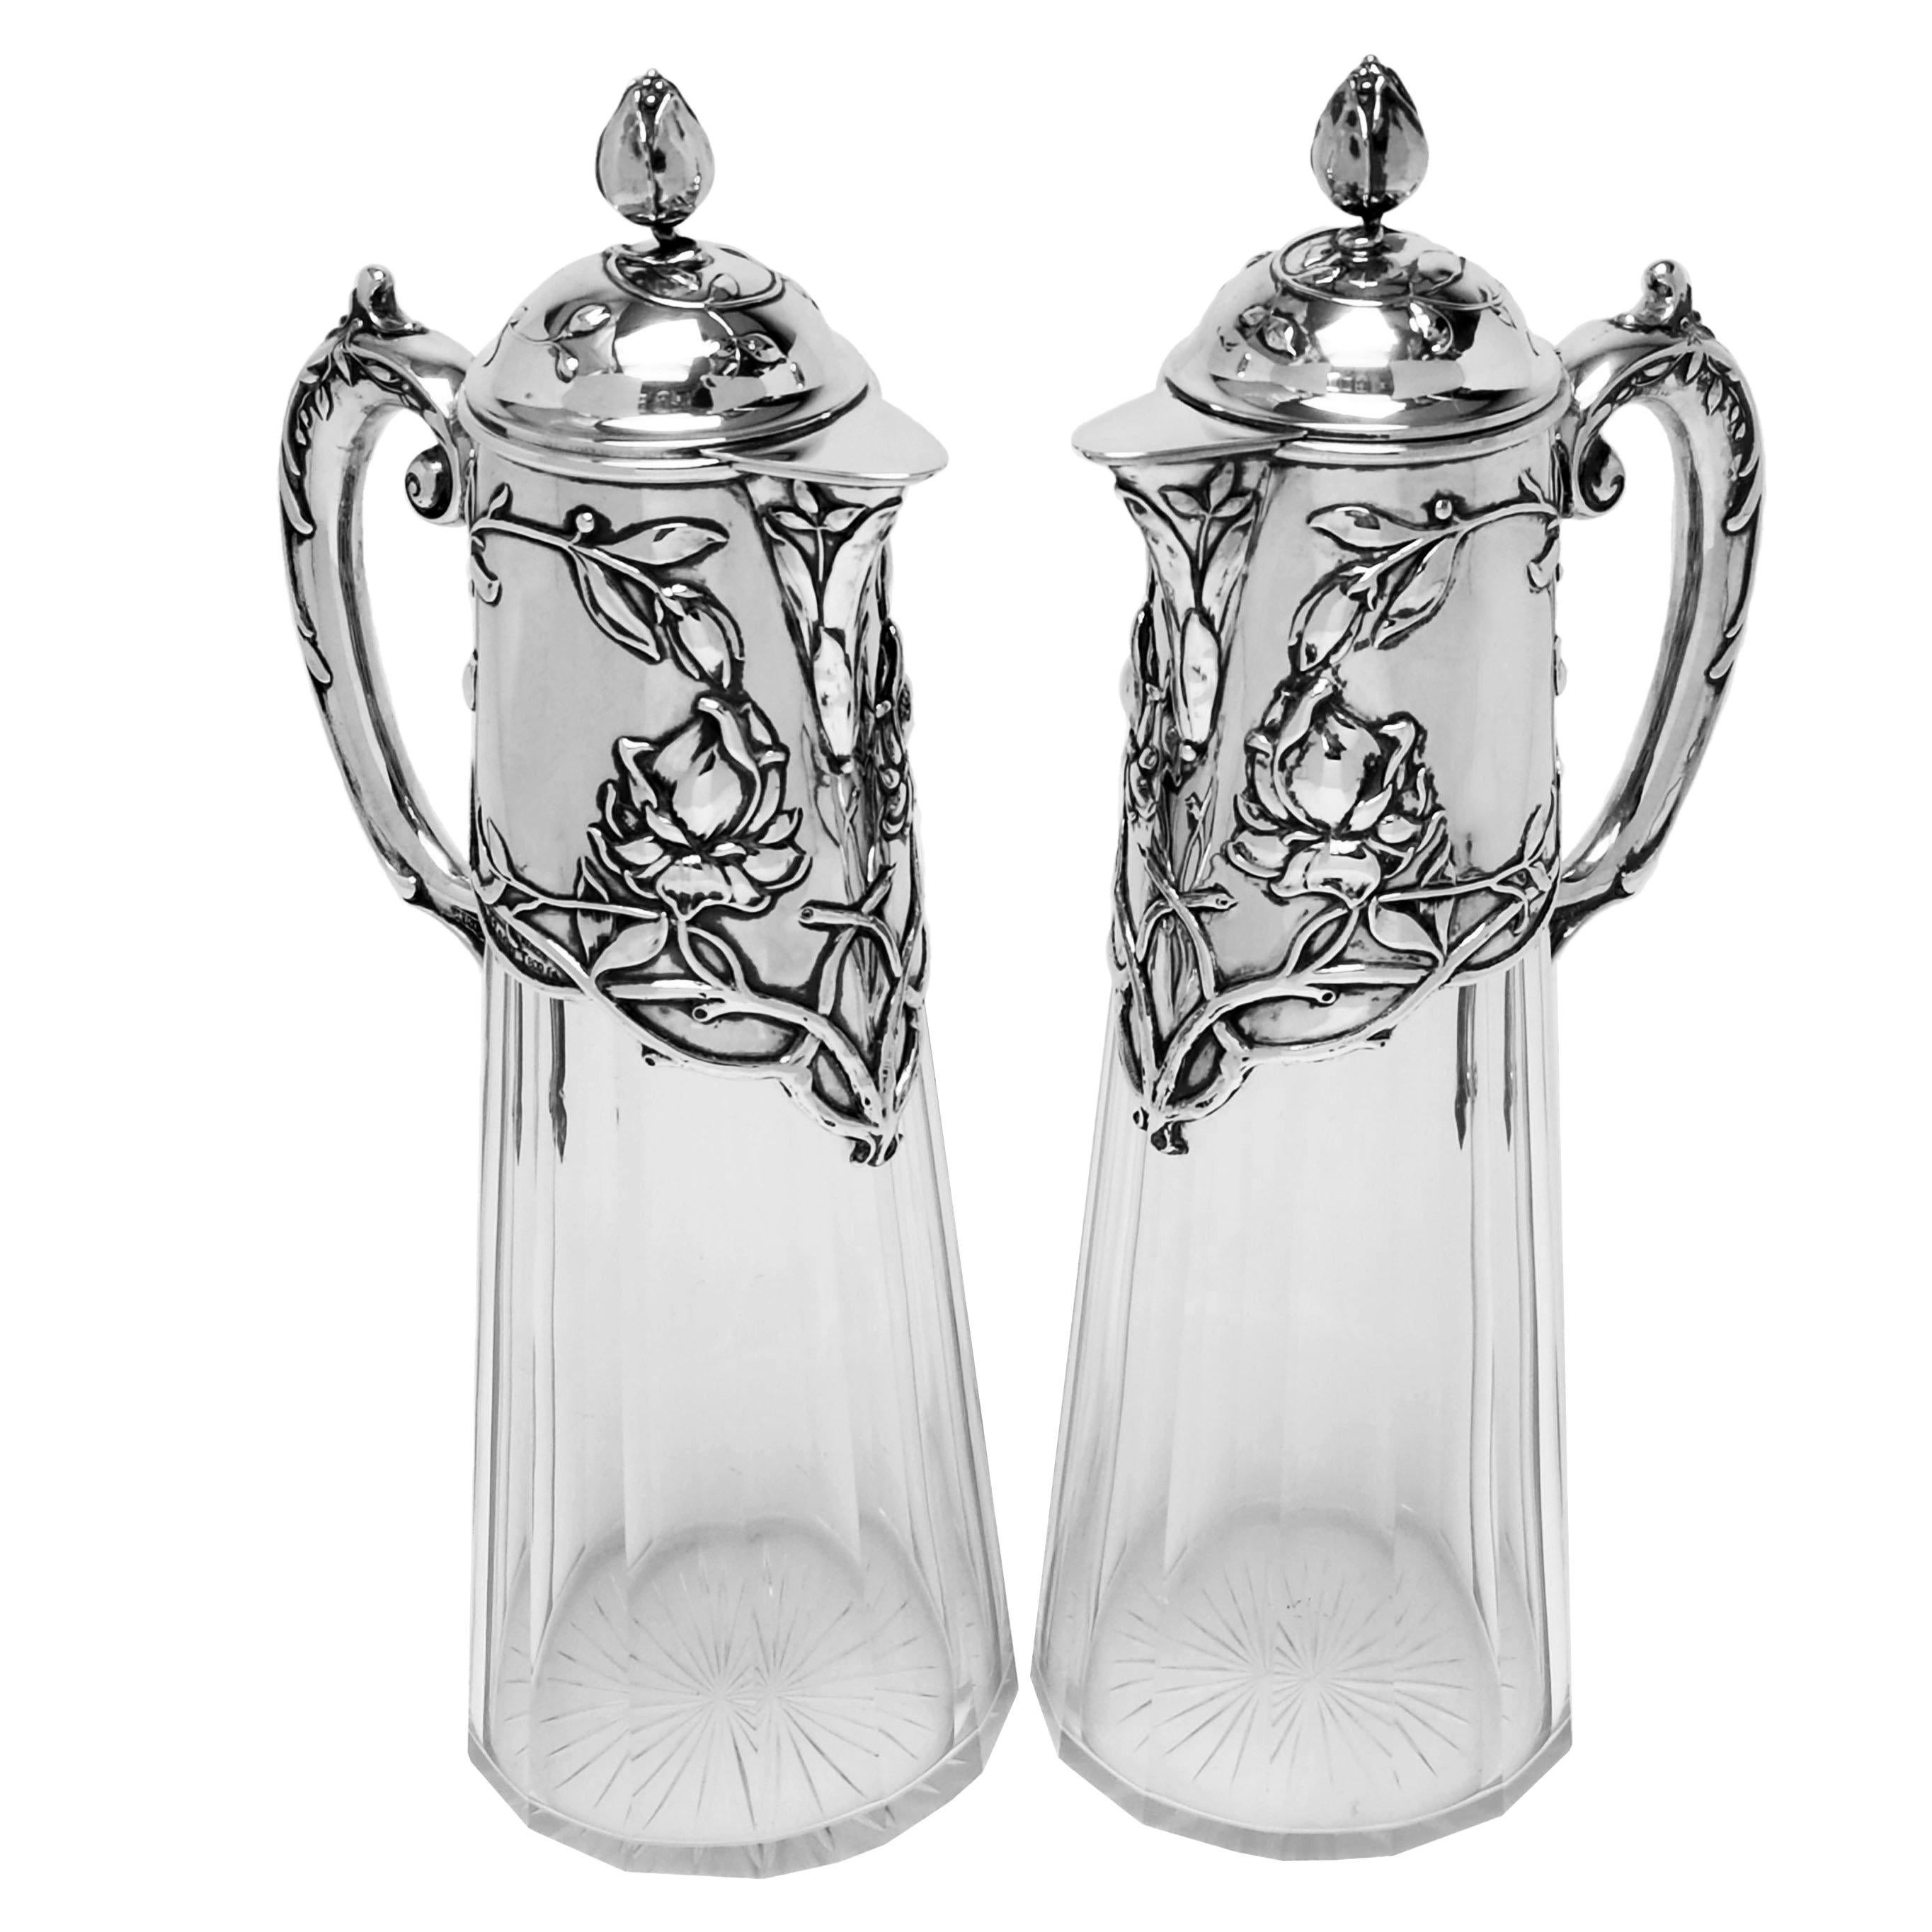 A pair of elegant antique German silver & cut glass claret jugs with classic Jugendstil design elements. The Silver neck, lid and handles of the Wine Jugs feature beautiful Art Nouveau floral and foliate designs and the Lid has a stylised floral